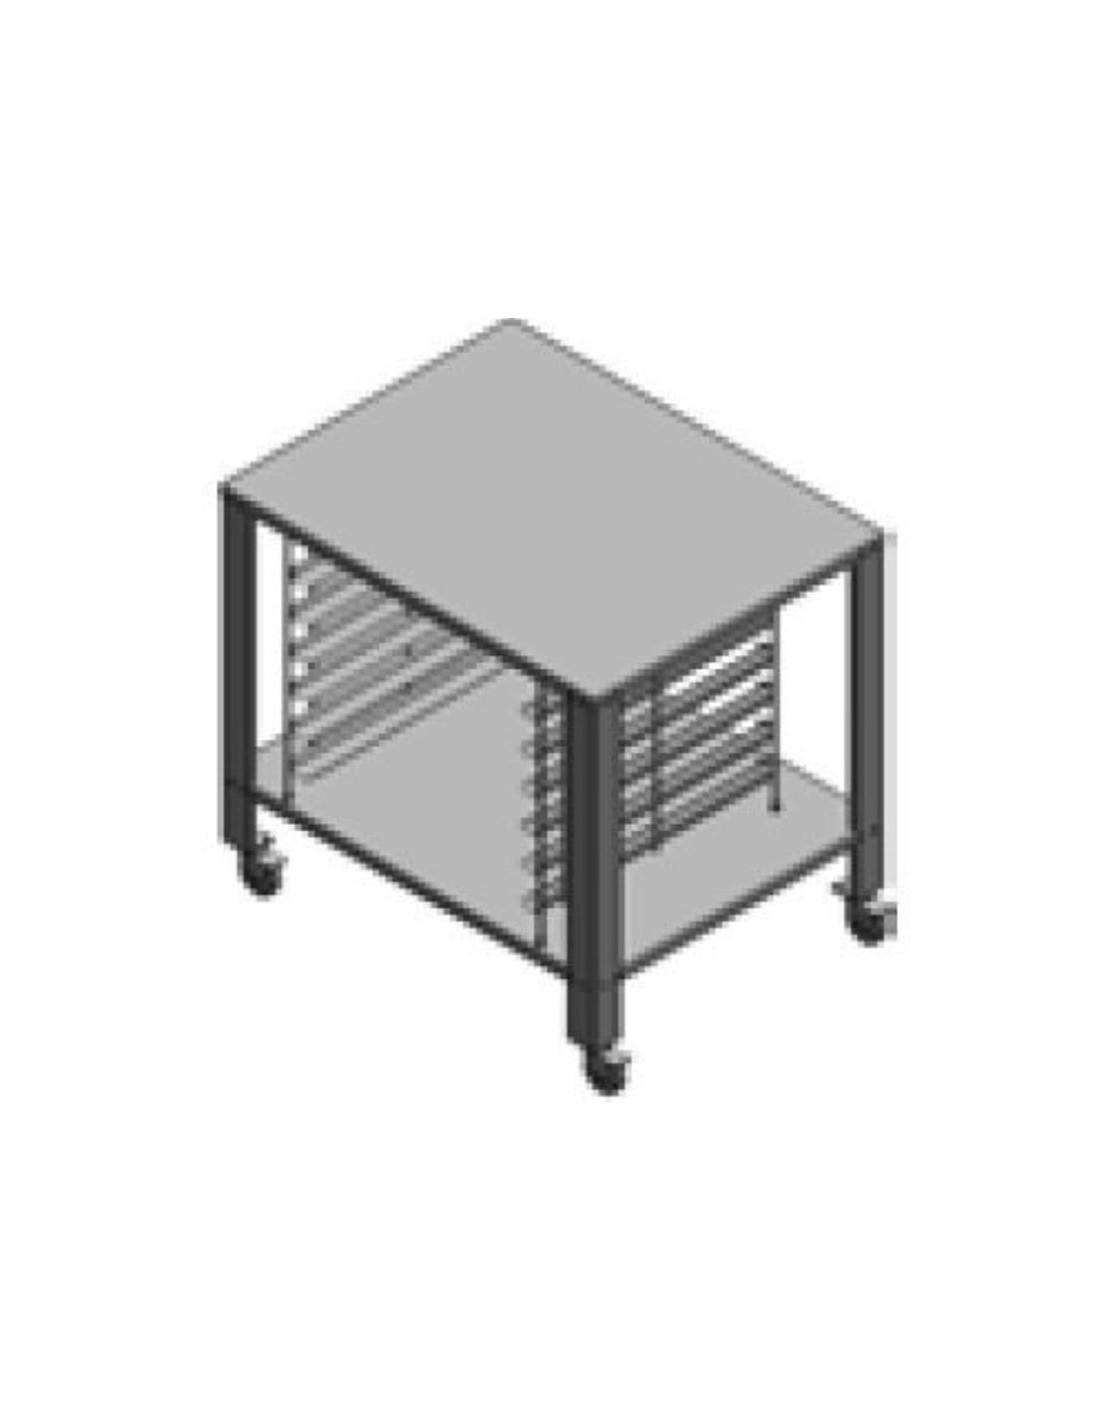 Fixed table in AISI 430 with universal wheels and supports - Capacity: 6 pans 2/3 GN or 6 grids cm 42.5 x 34 - cm 61 x 63 x 88